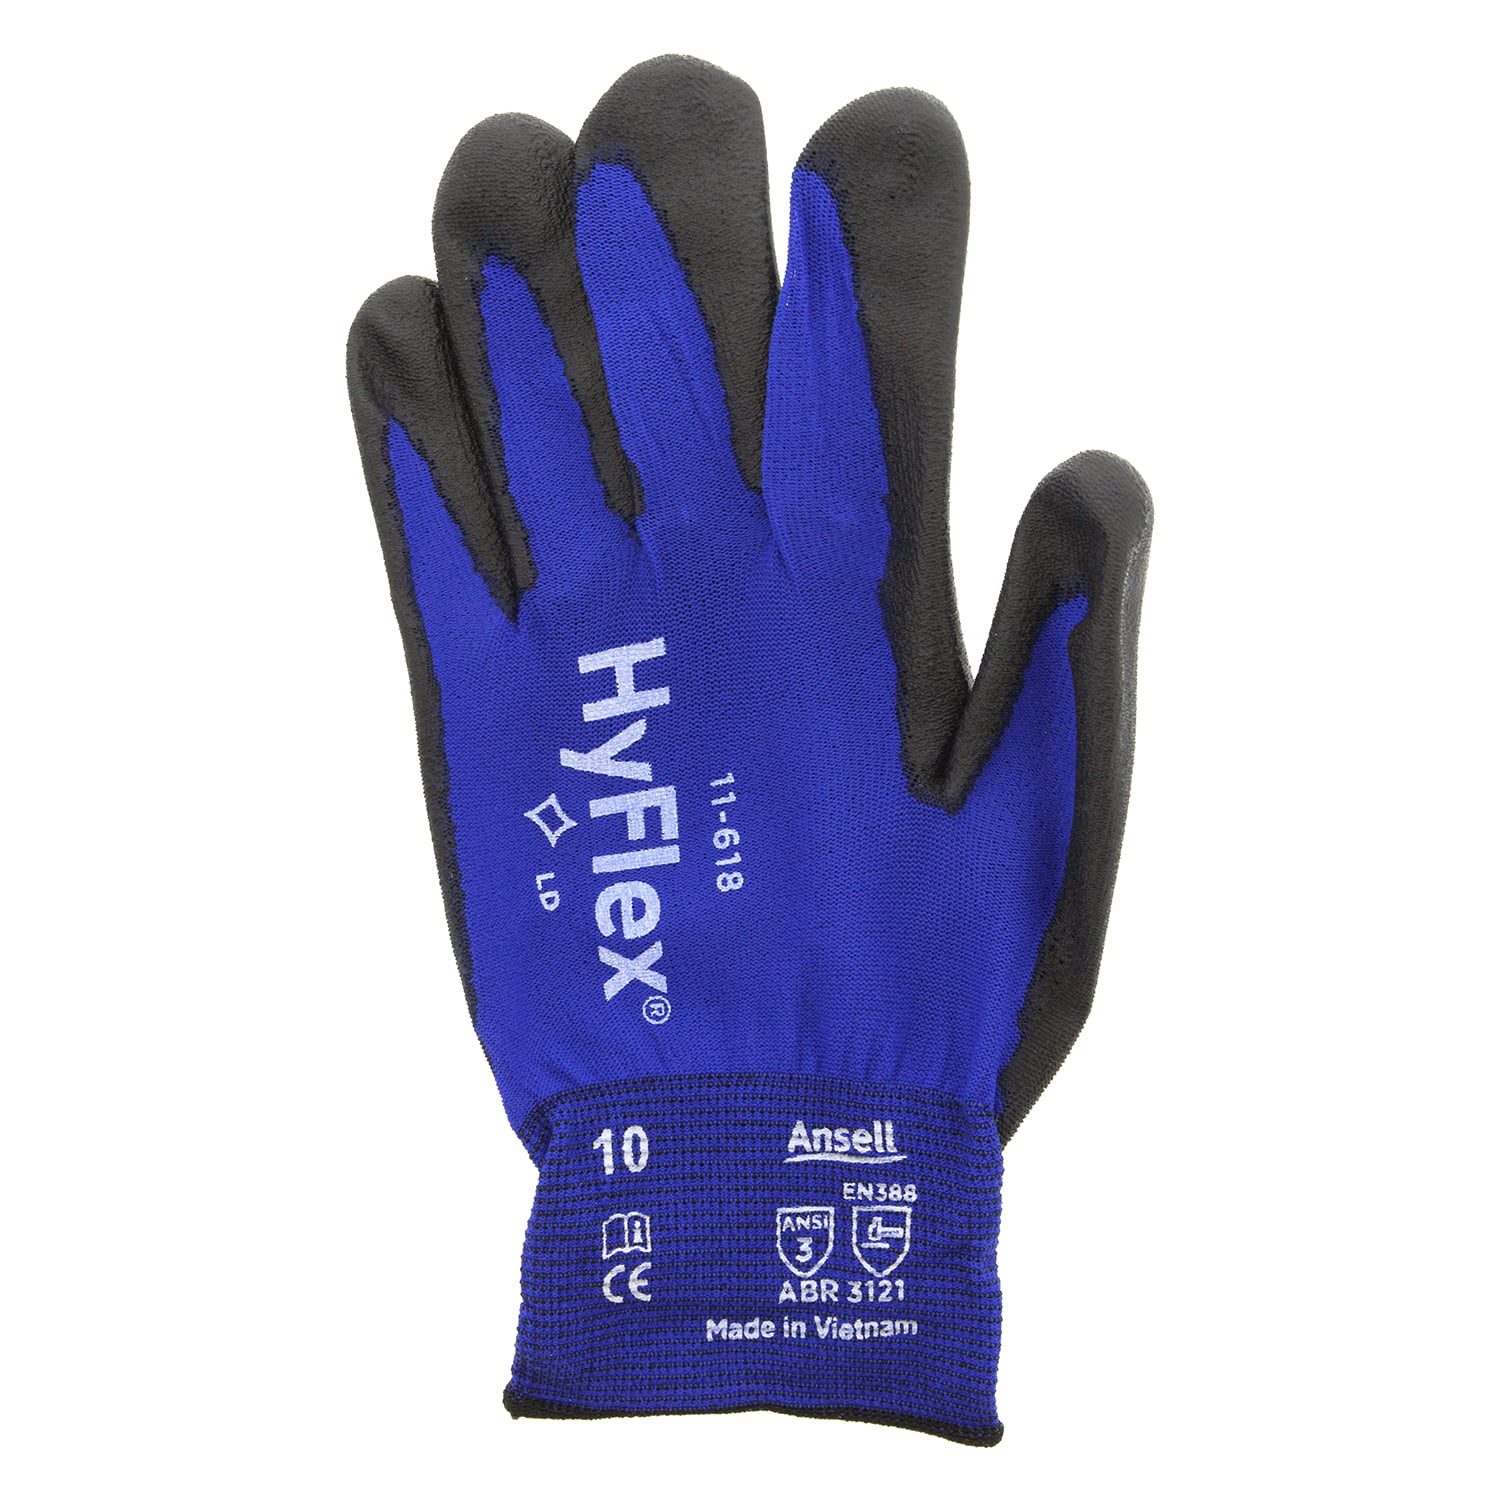 6 Pair Ansell HyFlex 11-618 Polyurethane Coated Precision Glove Size 10 